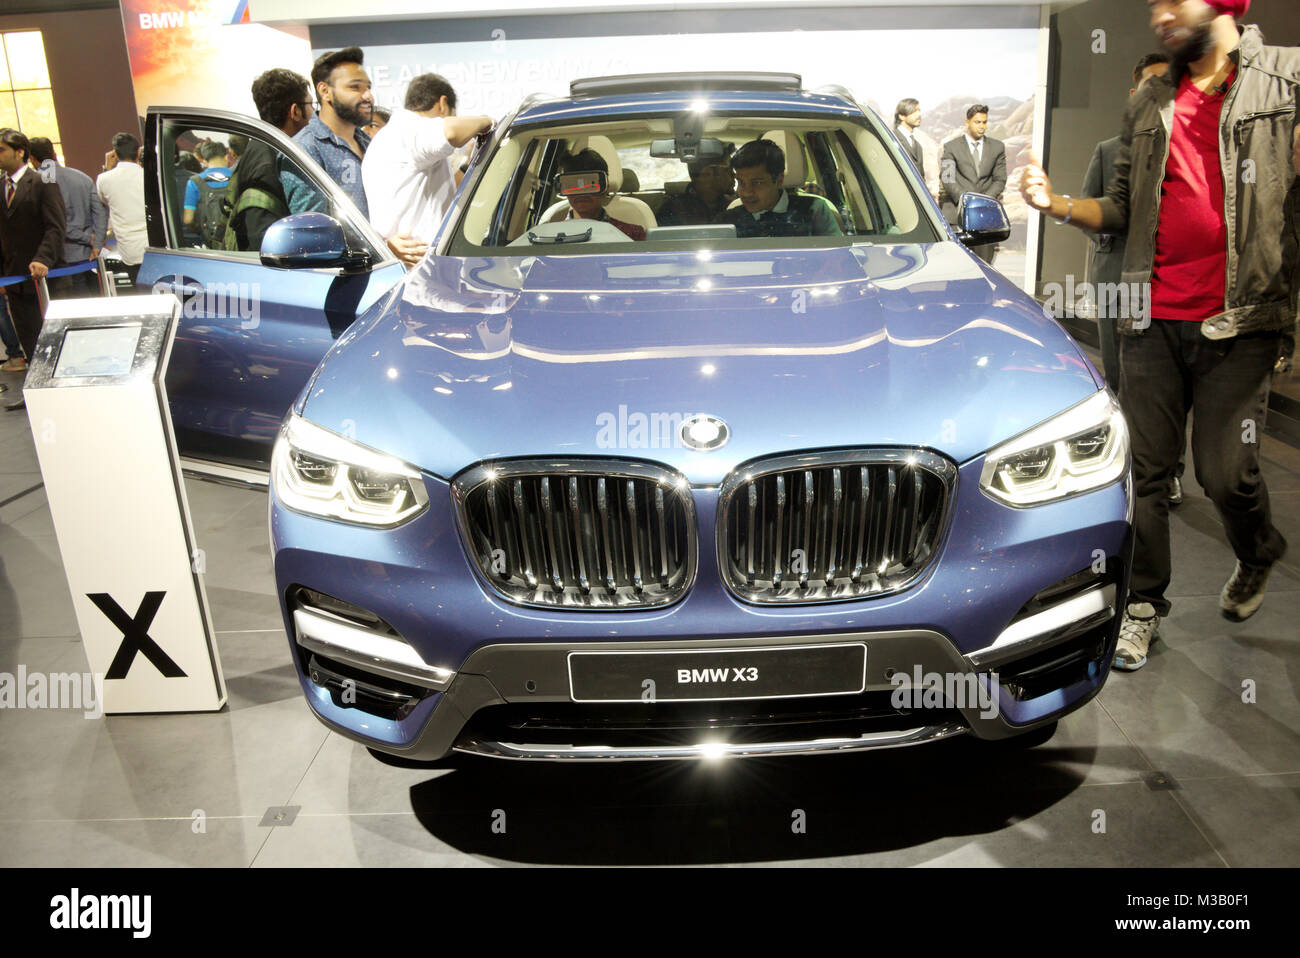 Greater Noida, India. 9th February 2018. Visitors find more about the BMW X3 20d Luxury Line car on display at the Auto Expo 2018 at India Expo Mart in Greater Noida, India. The Auto Expo is a biennial event and is being held during 9th to 14th February 2018. Credit: Karunesh Johri/Alamy Live News. Stock Photo